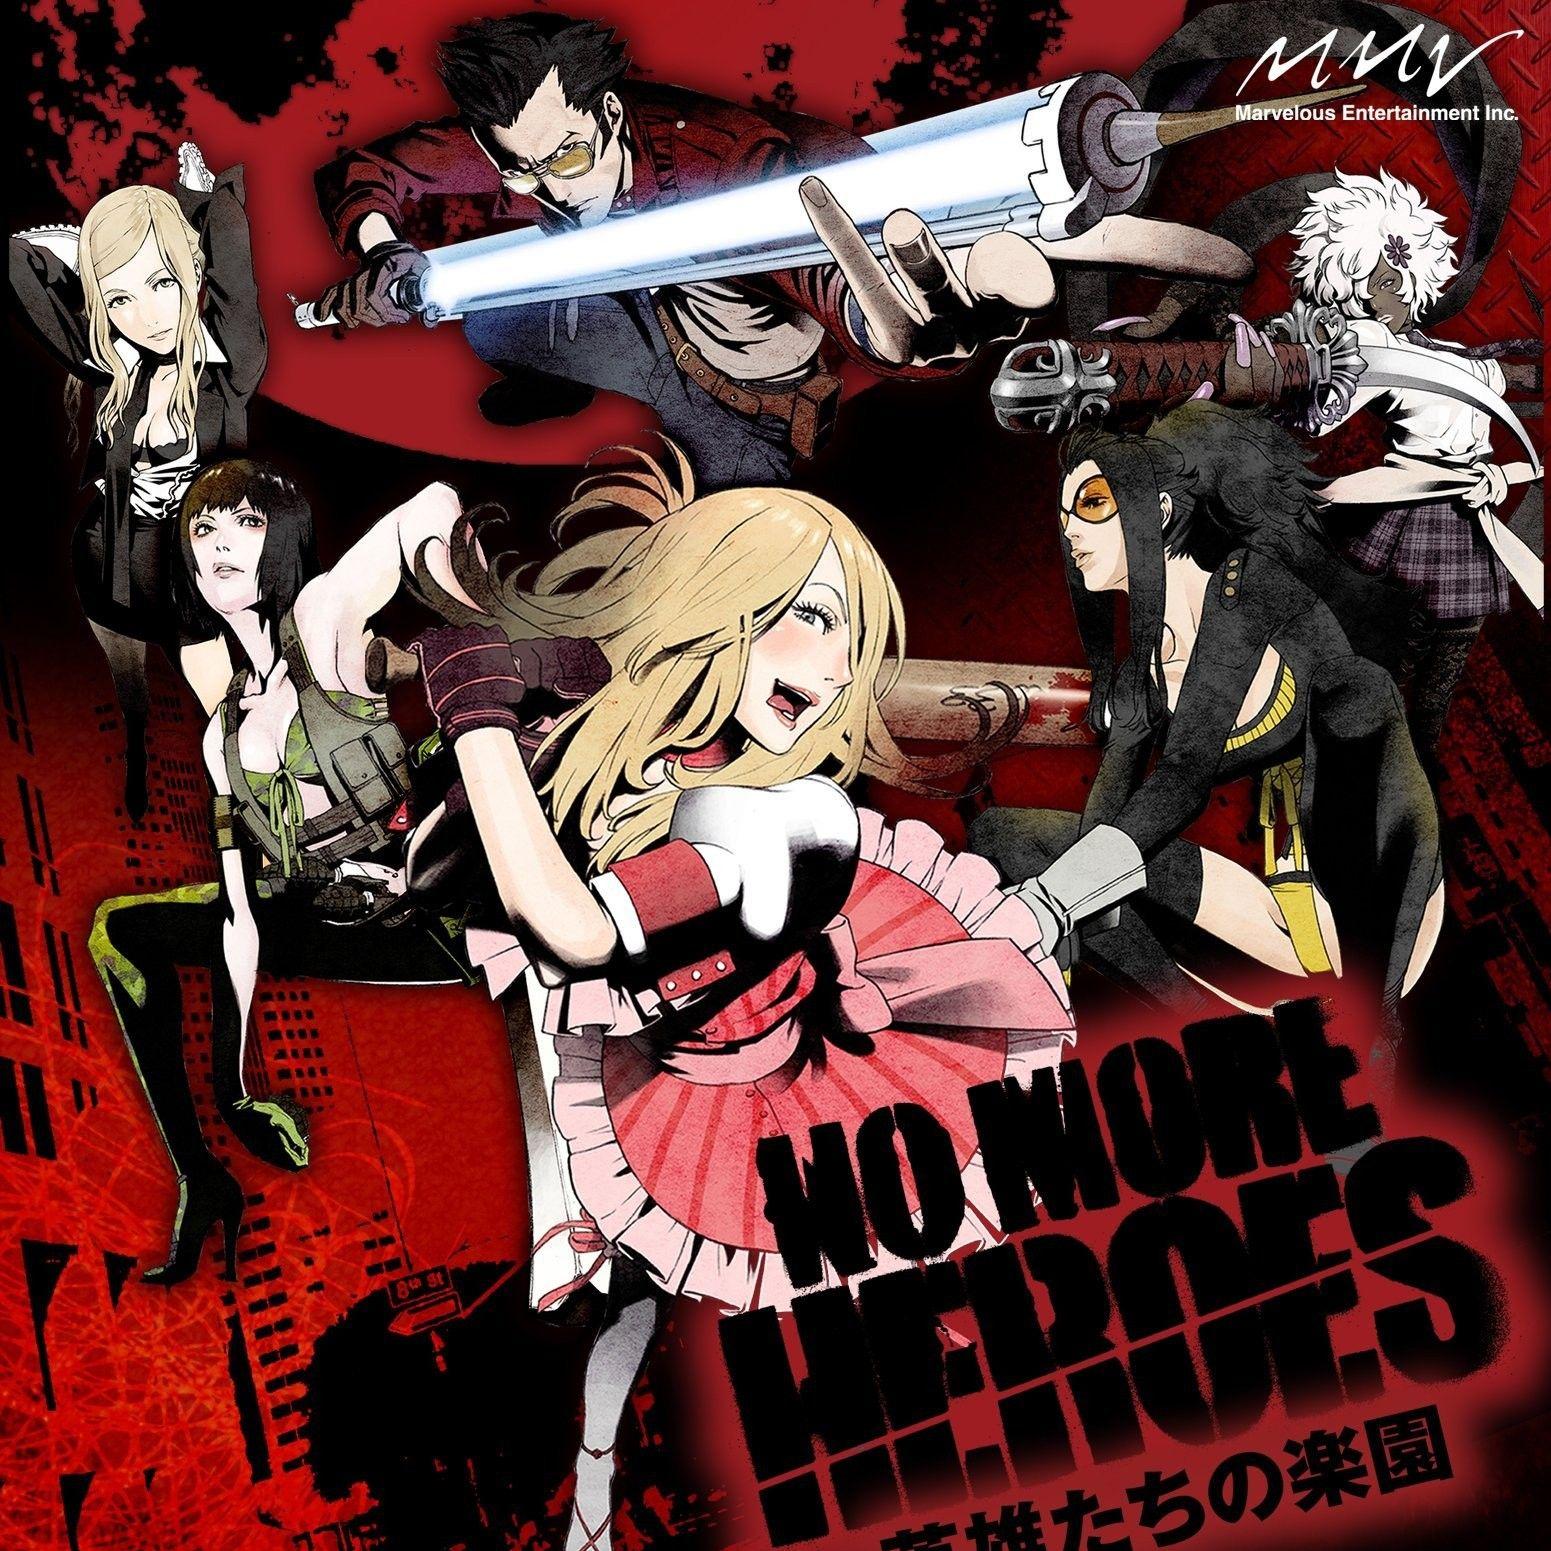 Update 59+ no more heroes wallpaper latest - in.cdgdbentre